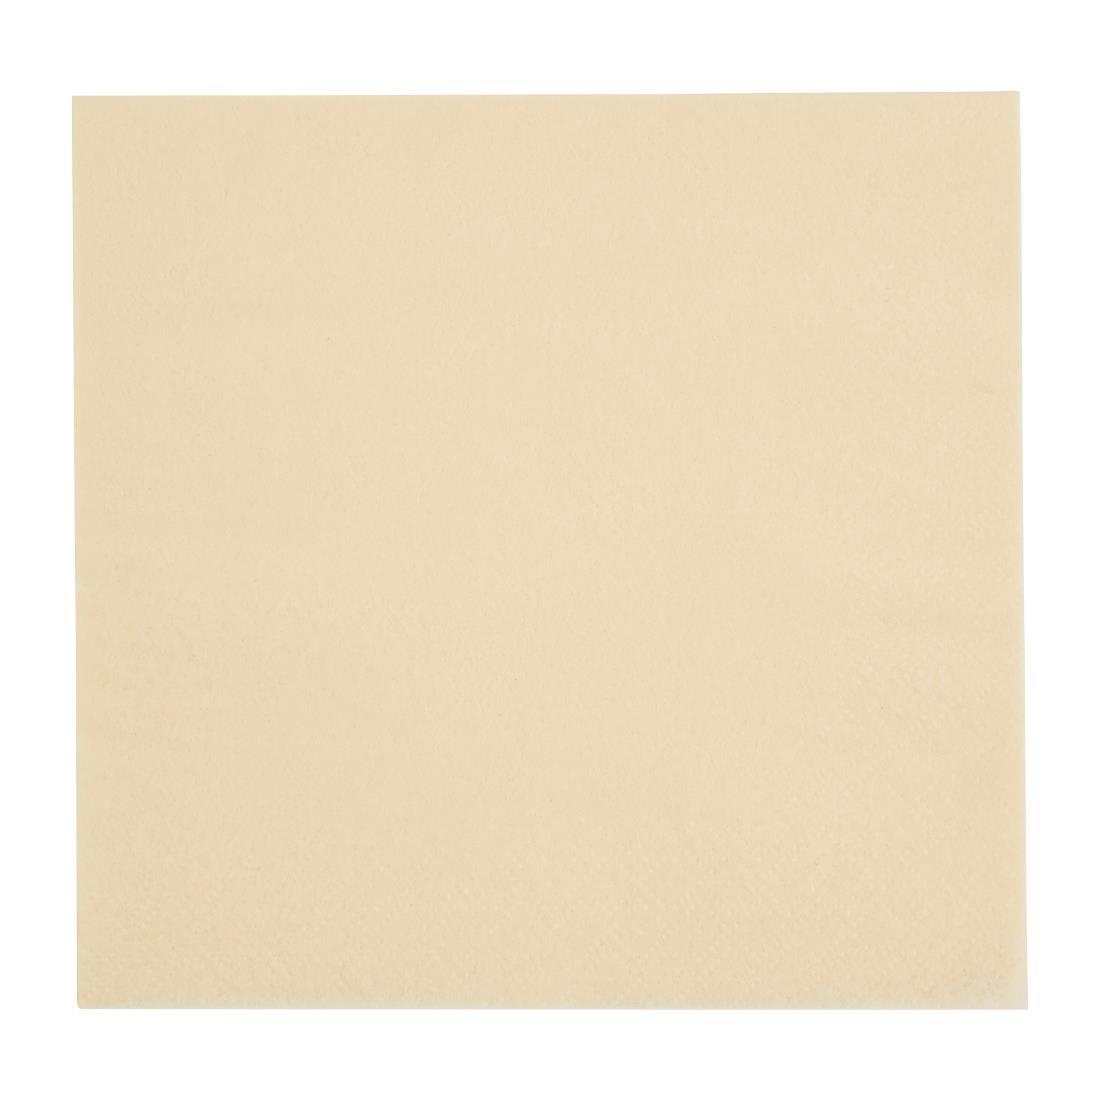 Fiesta Recyclable Lunch Napkin Cream 33x33cm 2ply 1/4 Fold (Pack of 2000) - FE220  - 1